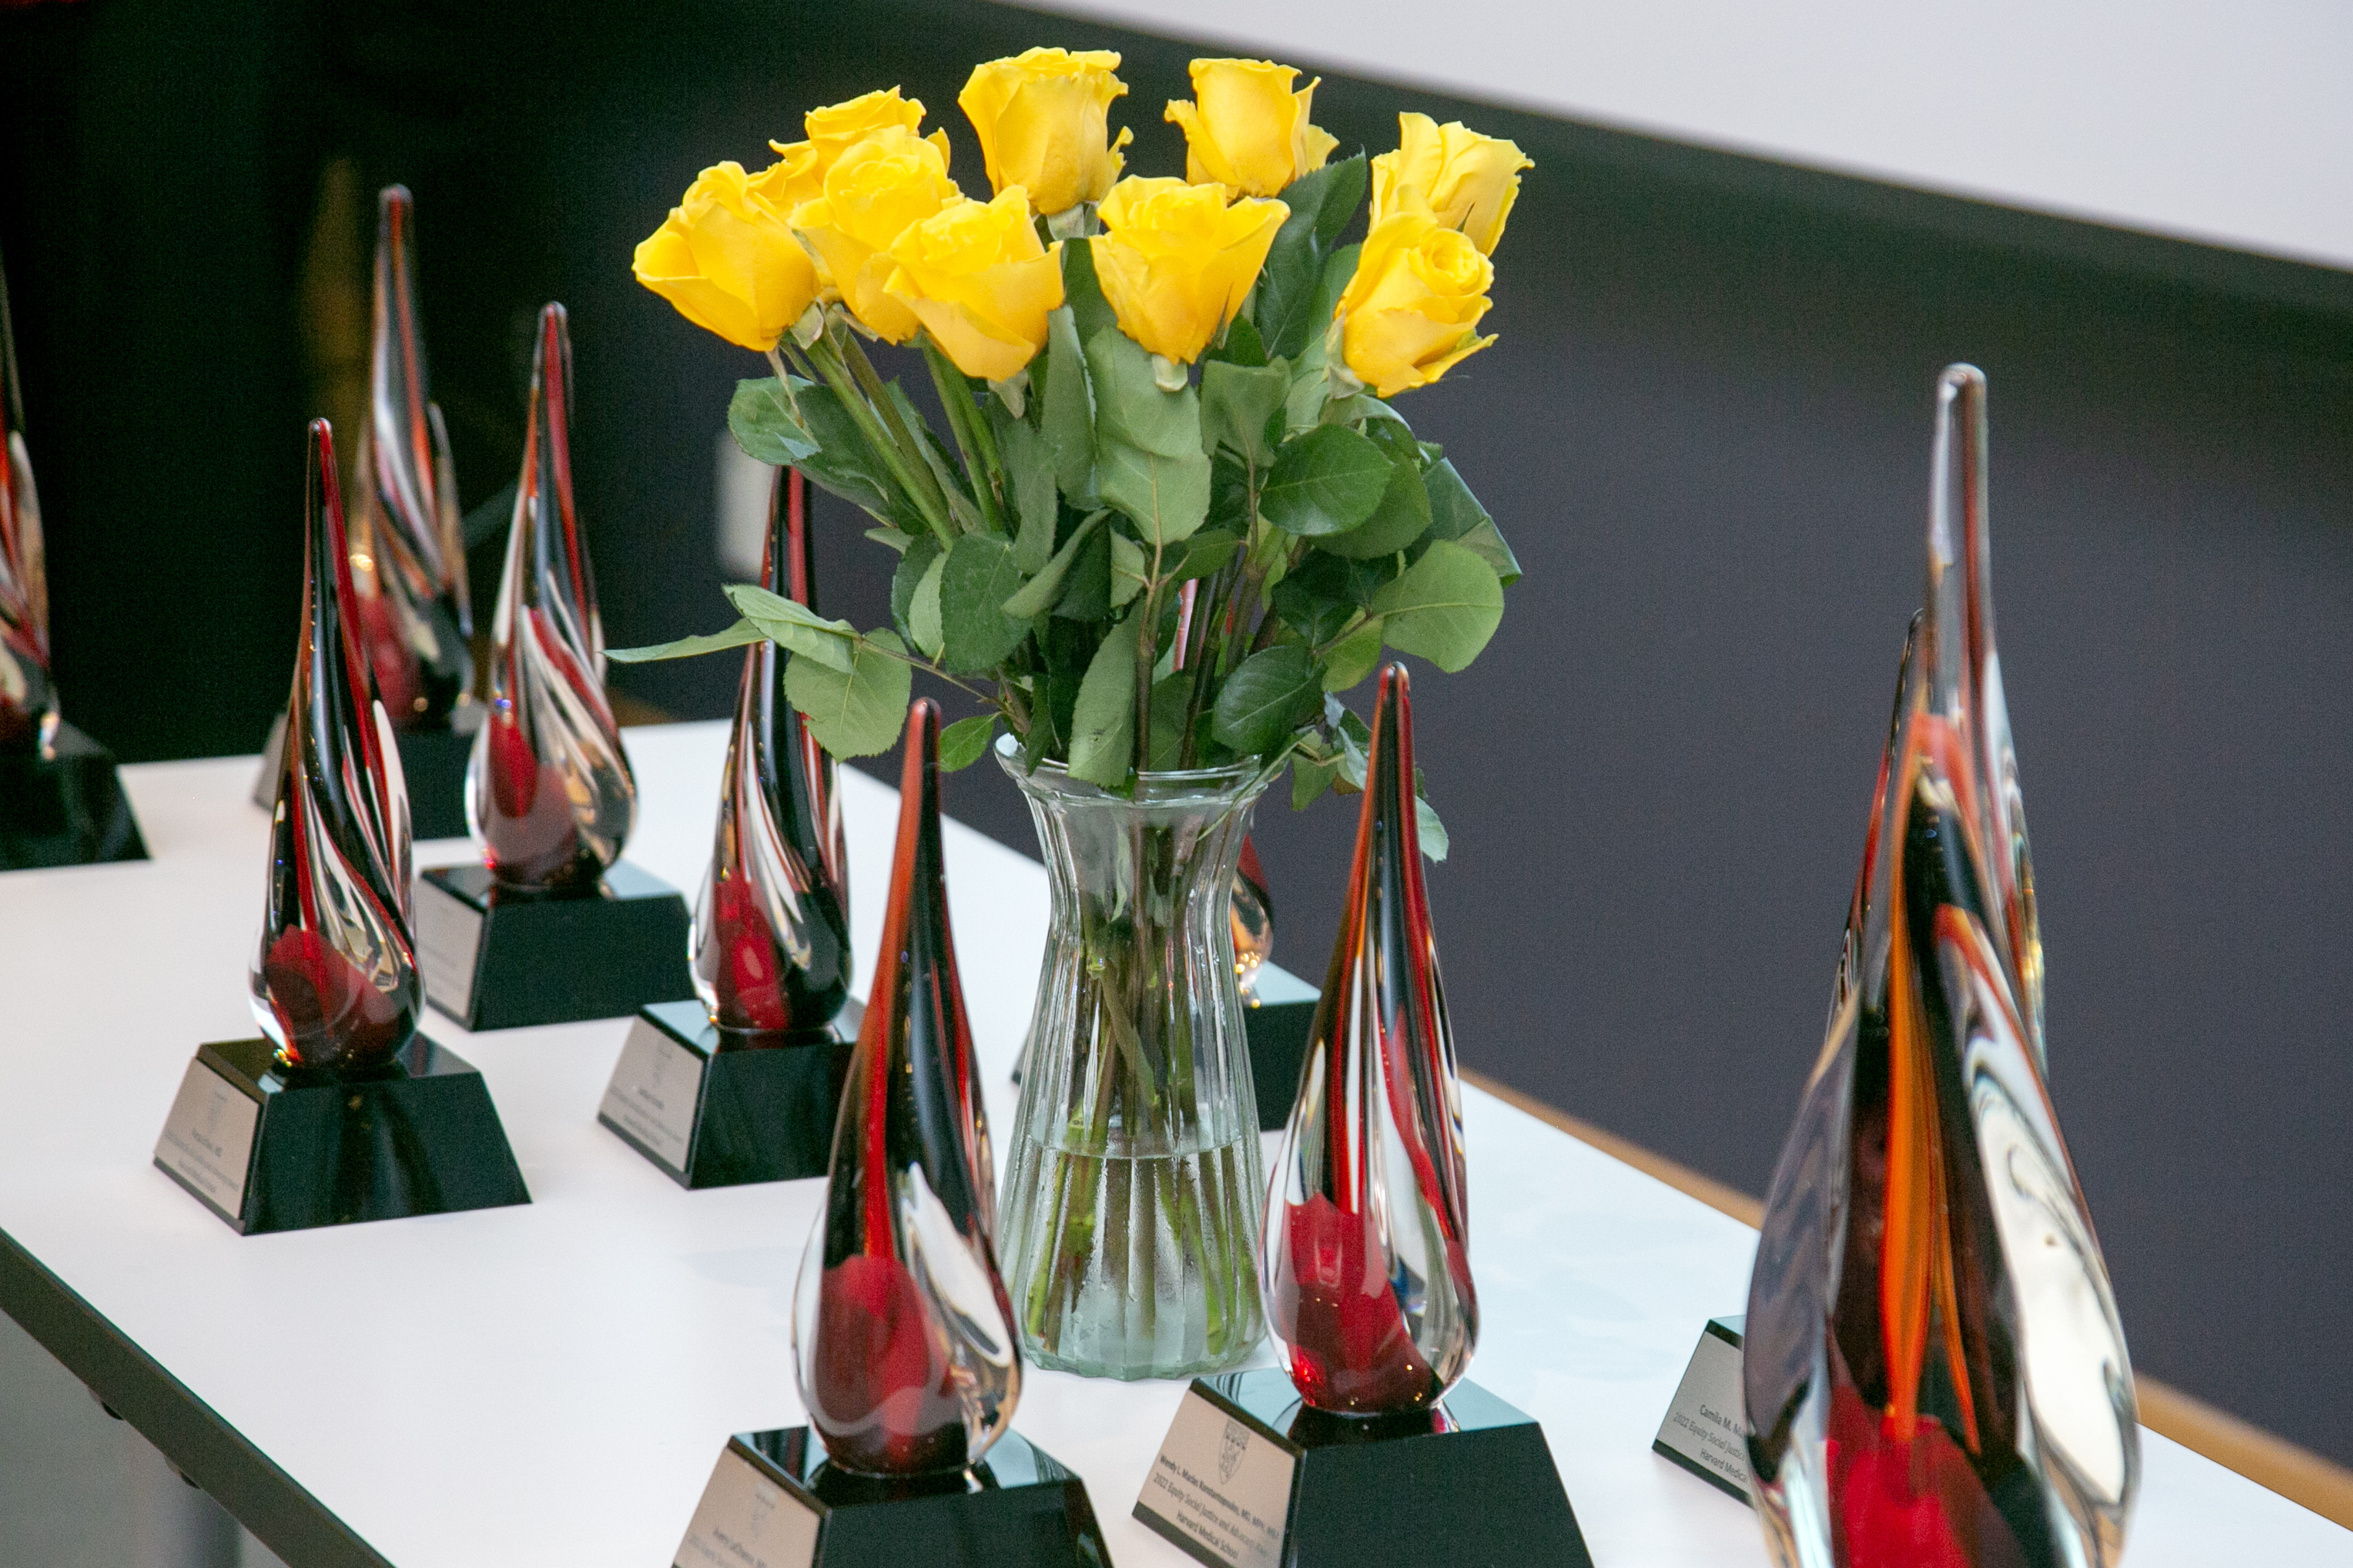 The ESJA Awards, shaped like red glass droplets, sit on a table alongside a vase of yellow roses. 